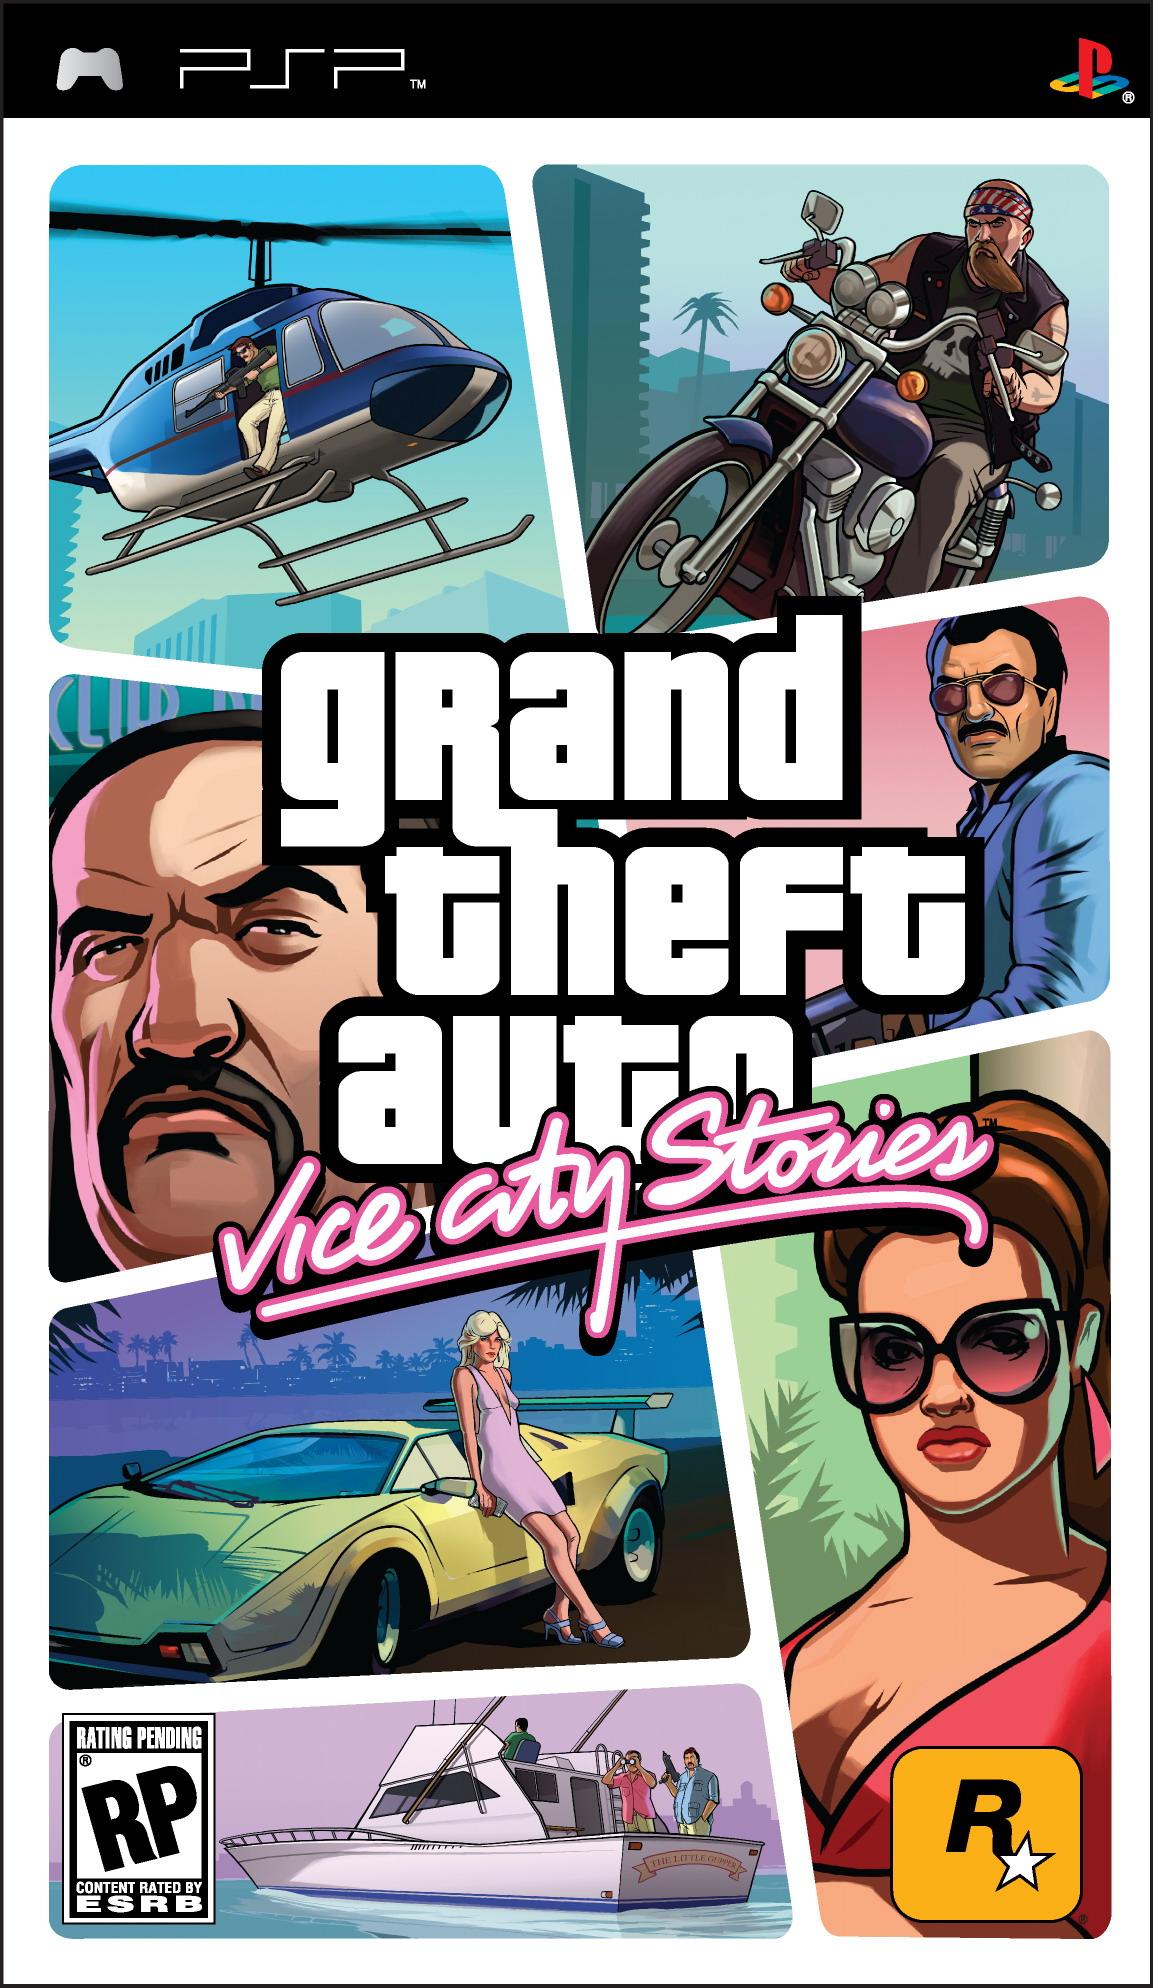 gta vice city stories characters